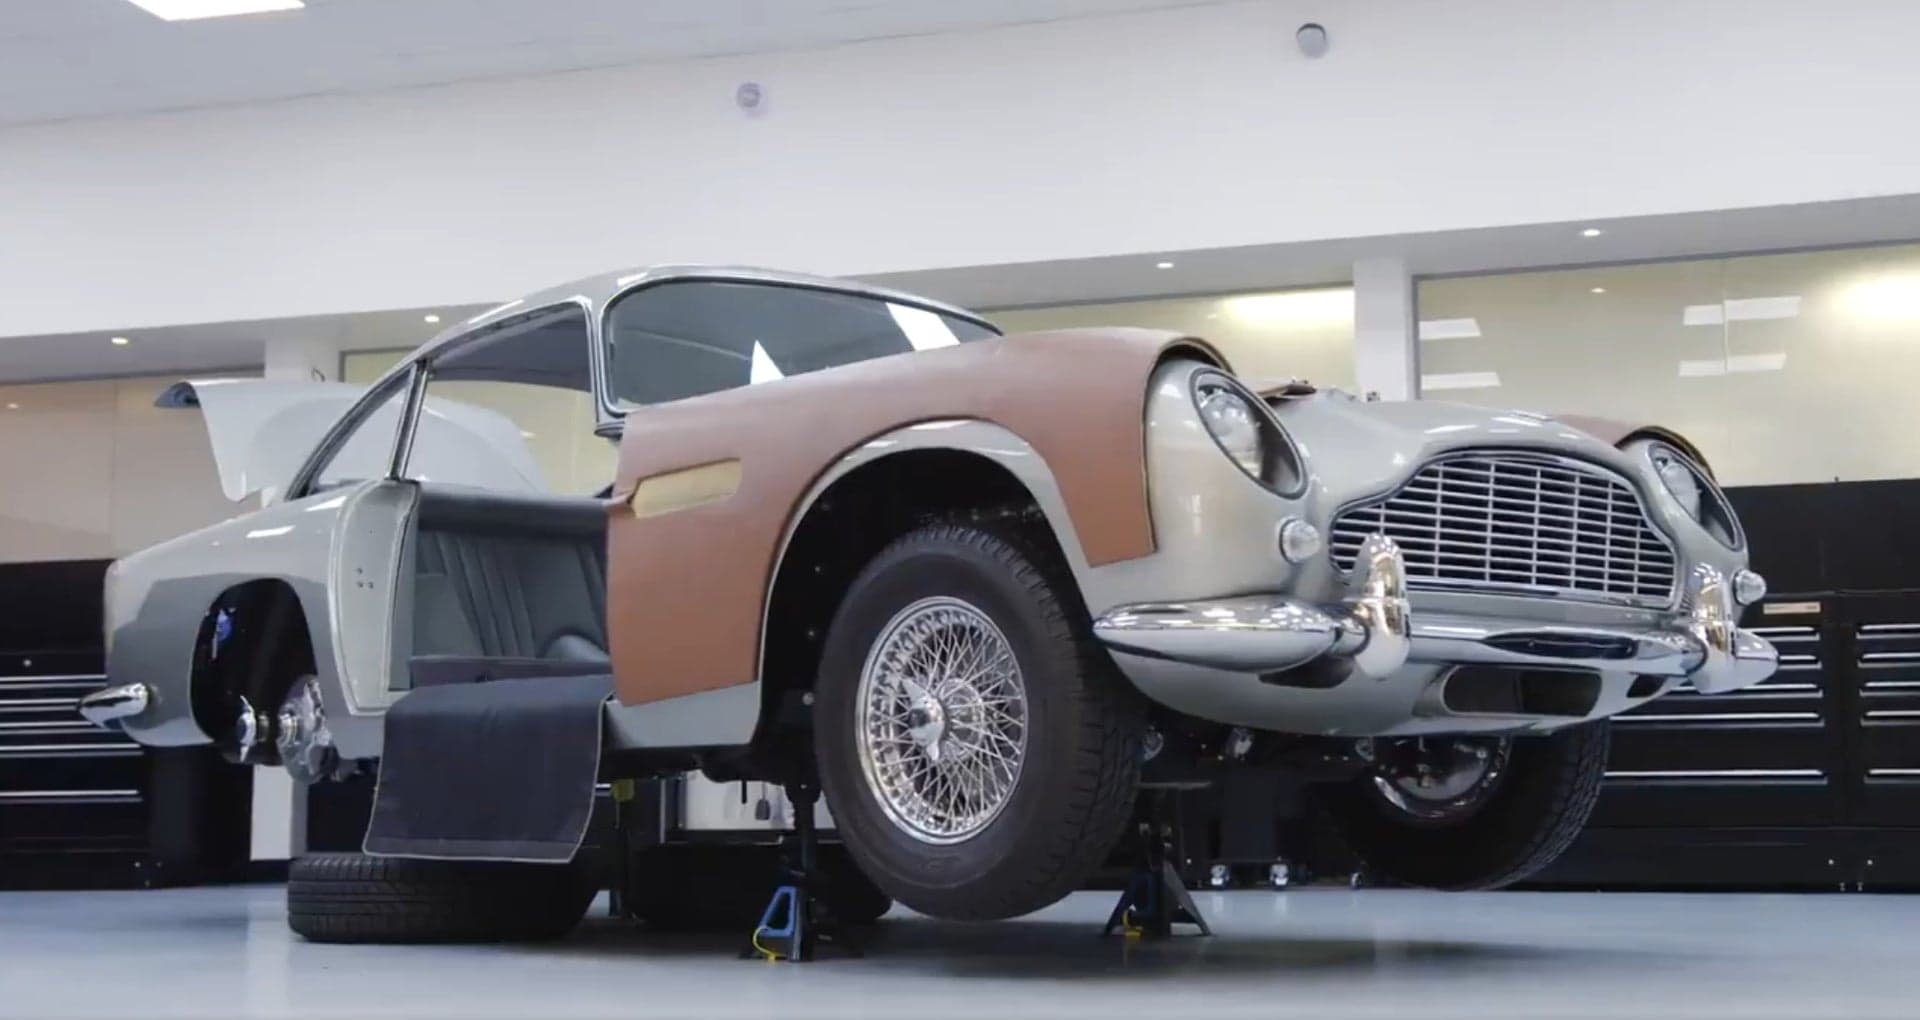 Aston Martin Reveals 007 James Bond Gadgets Fitted to $3.5 Million DB5 Continuation Cars